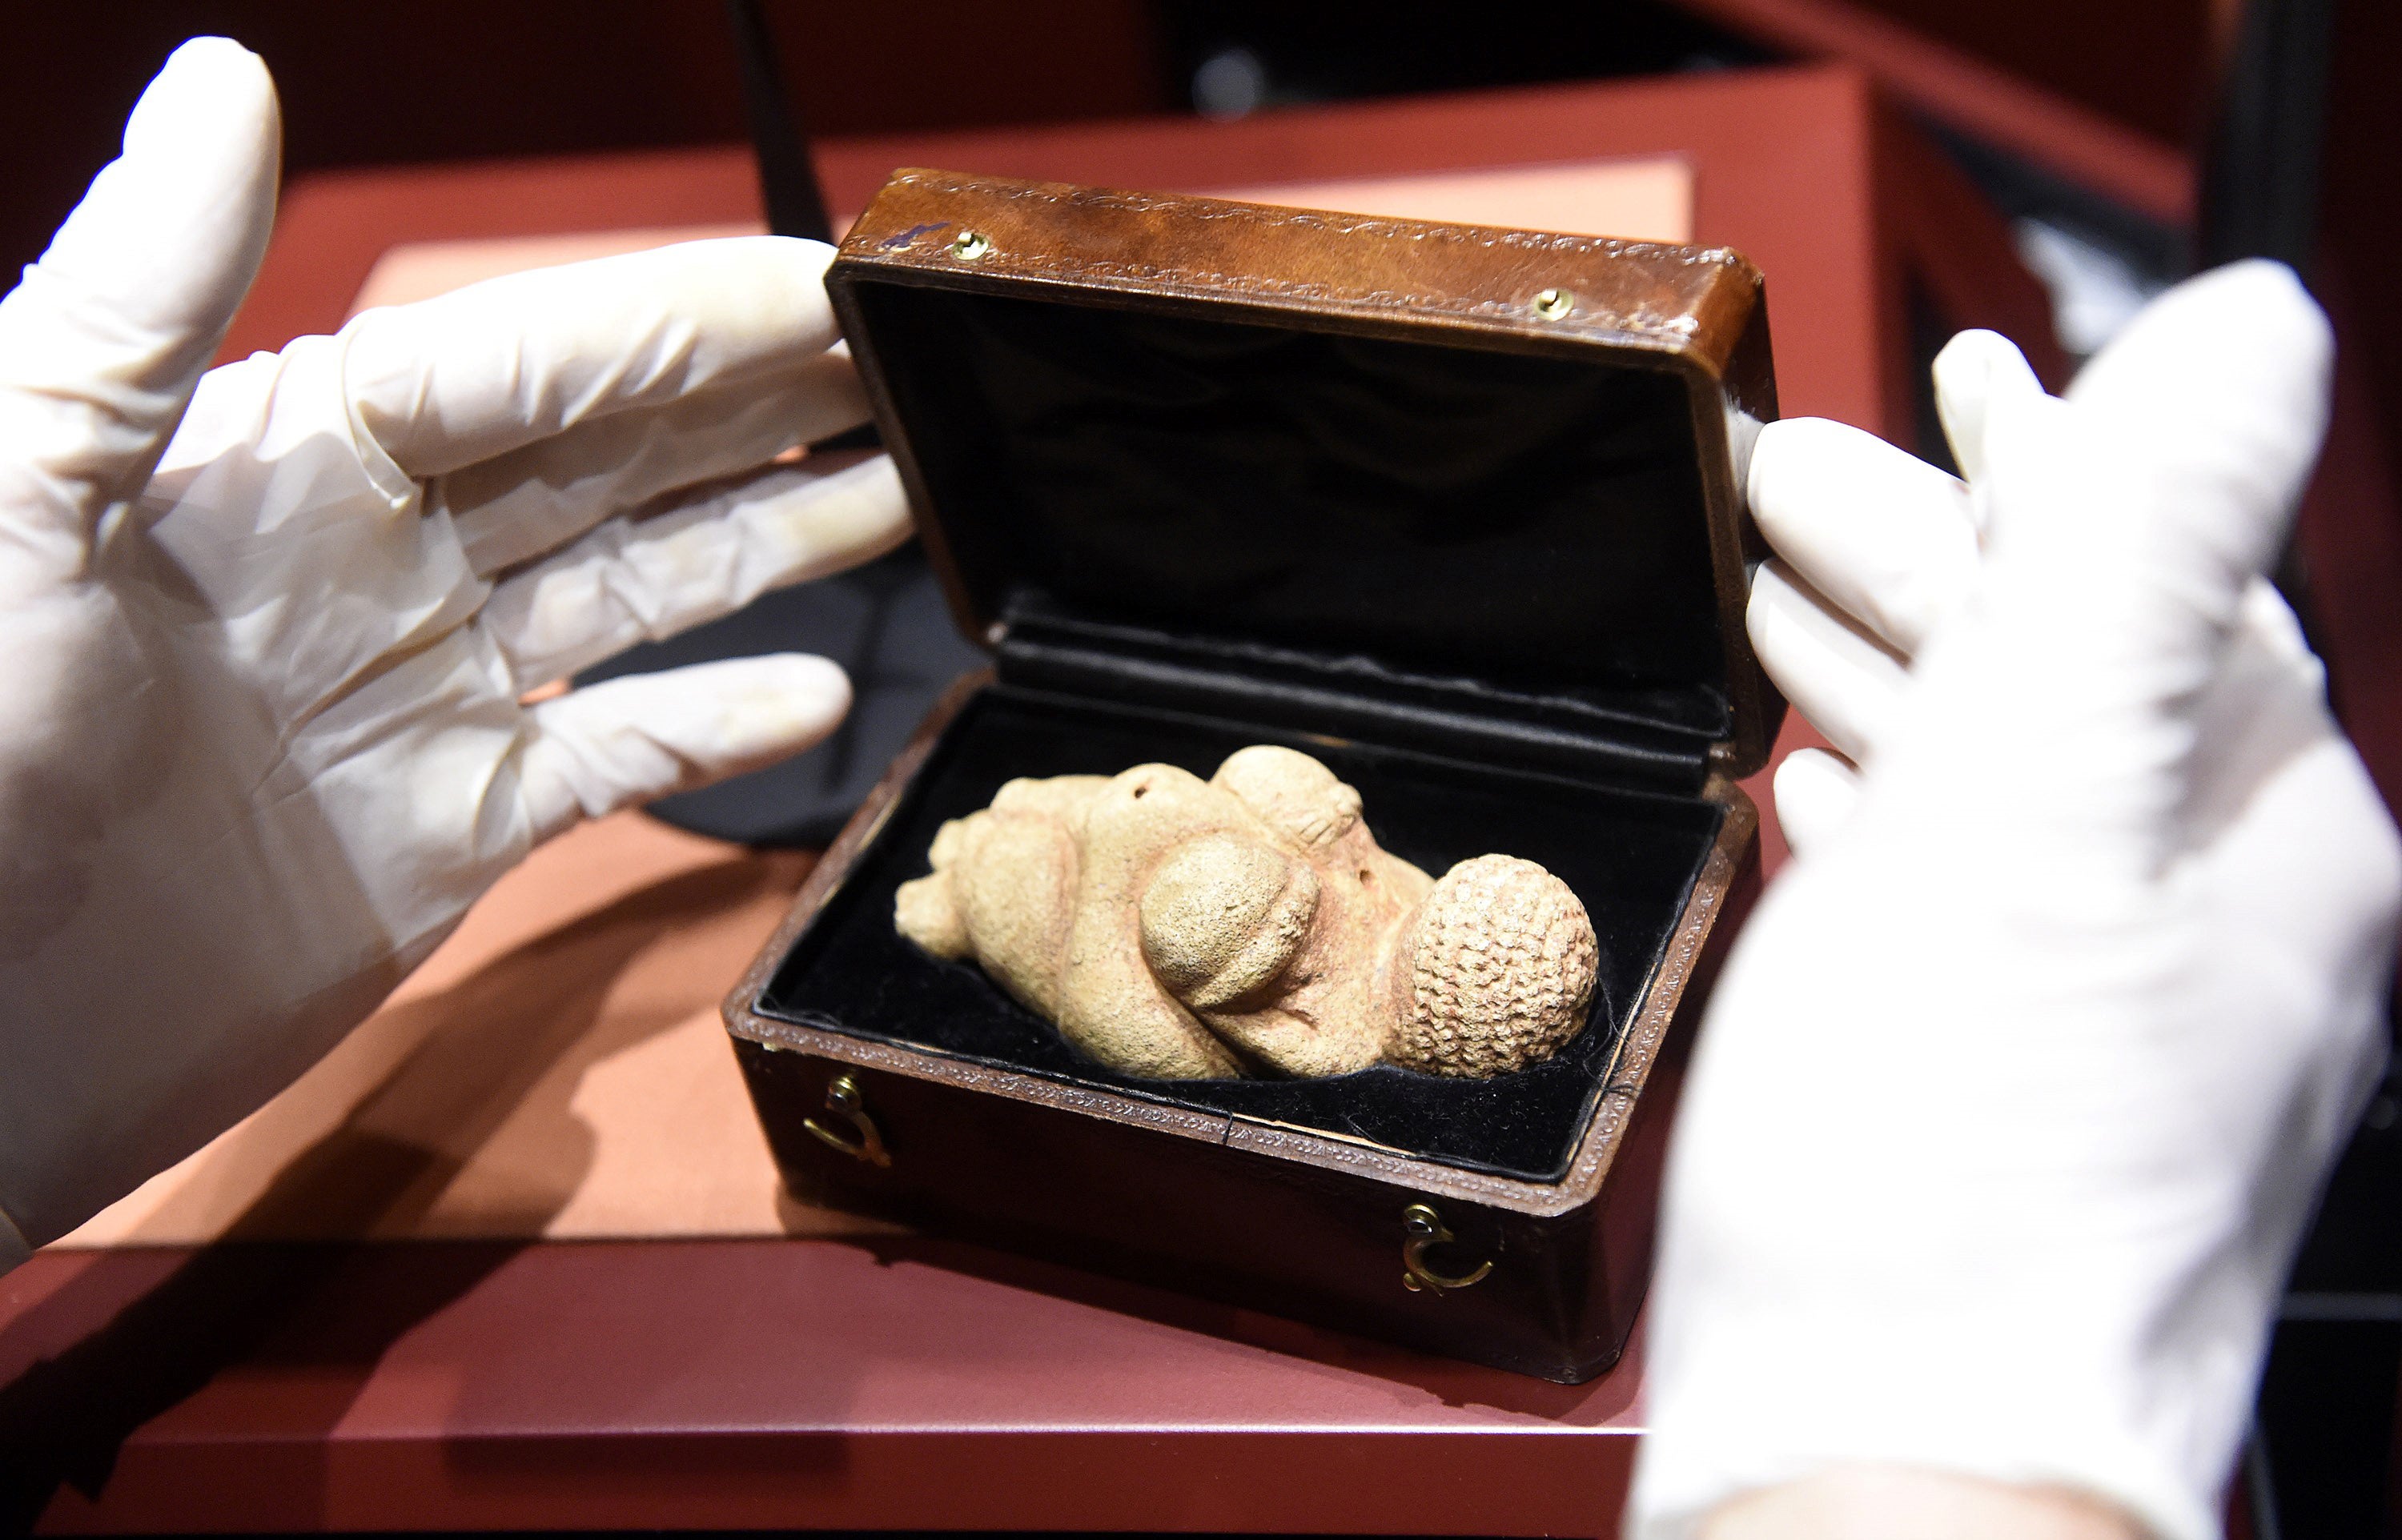 File: This undated picture released on 28 February 2018 shows the hands of a person opening a box containing the ‘Venus of Willendorf’ figurine at the Nature Historical Museum, that was censored by Facebook